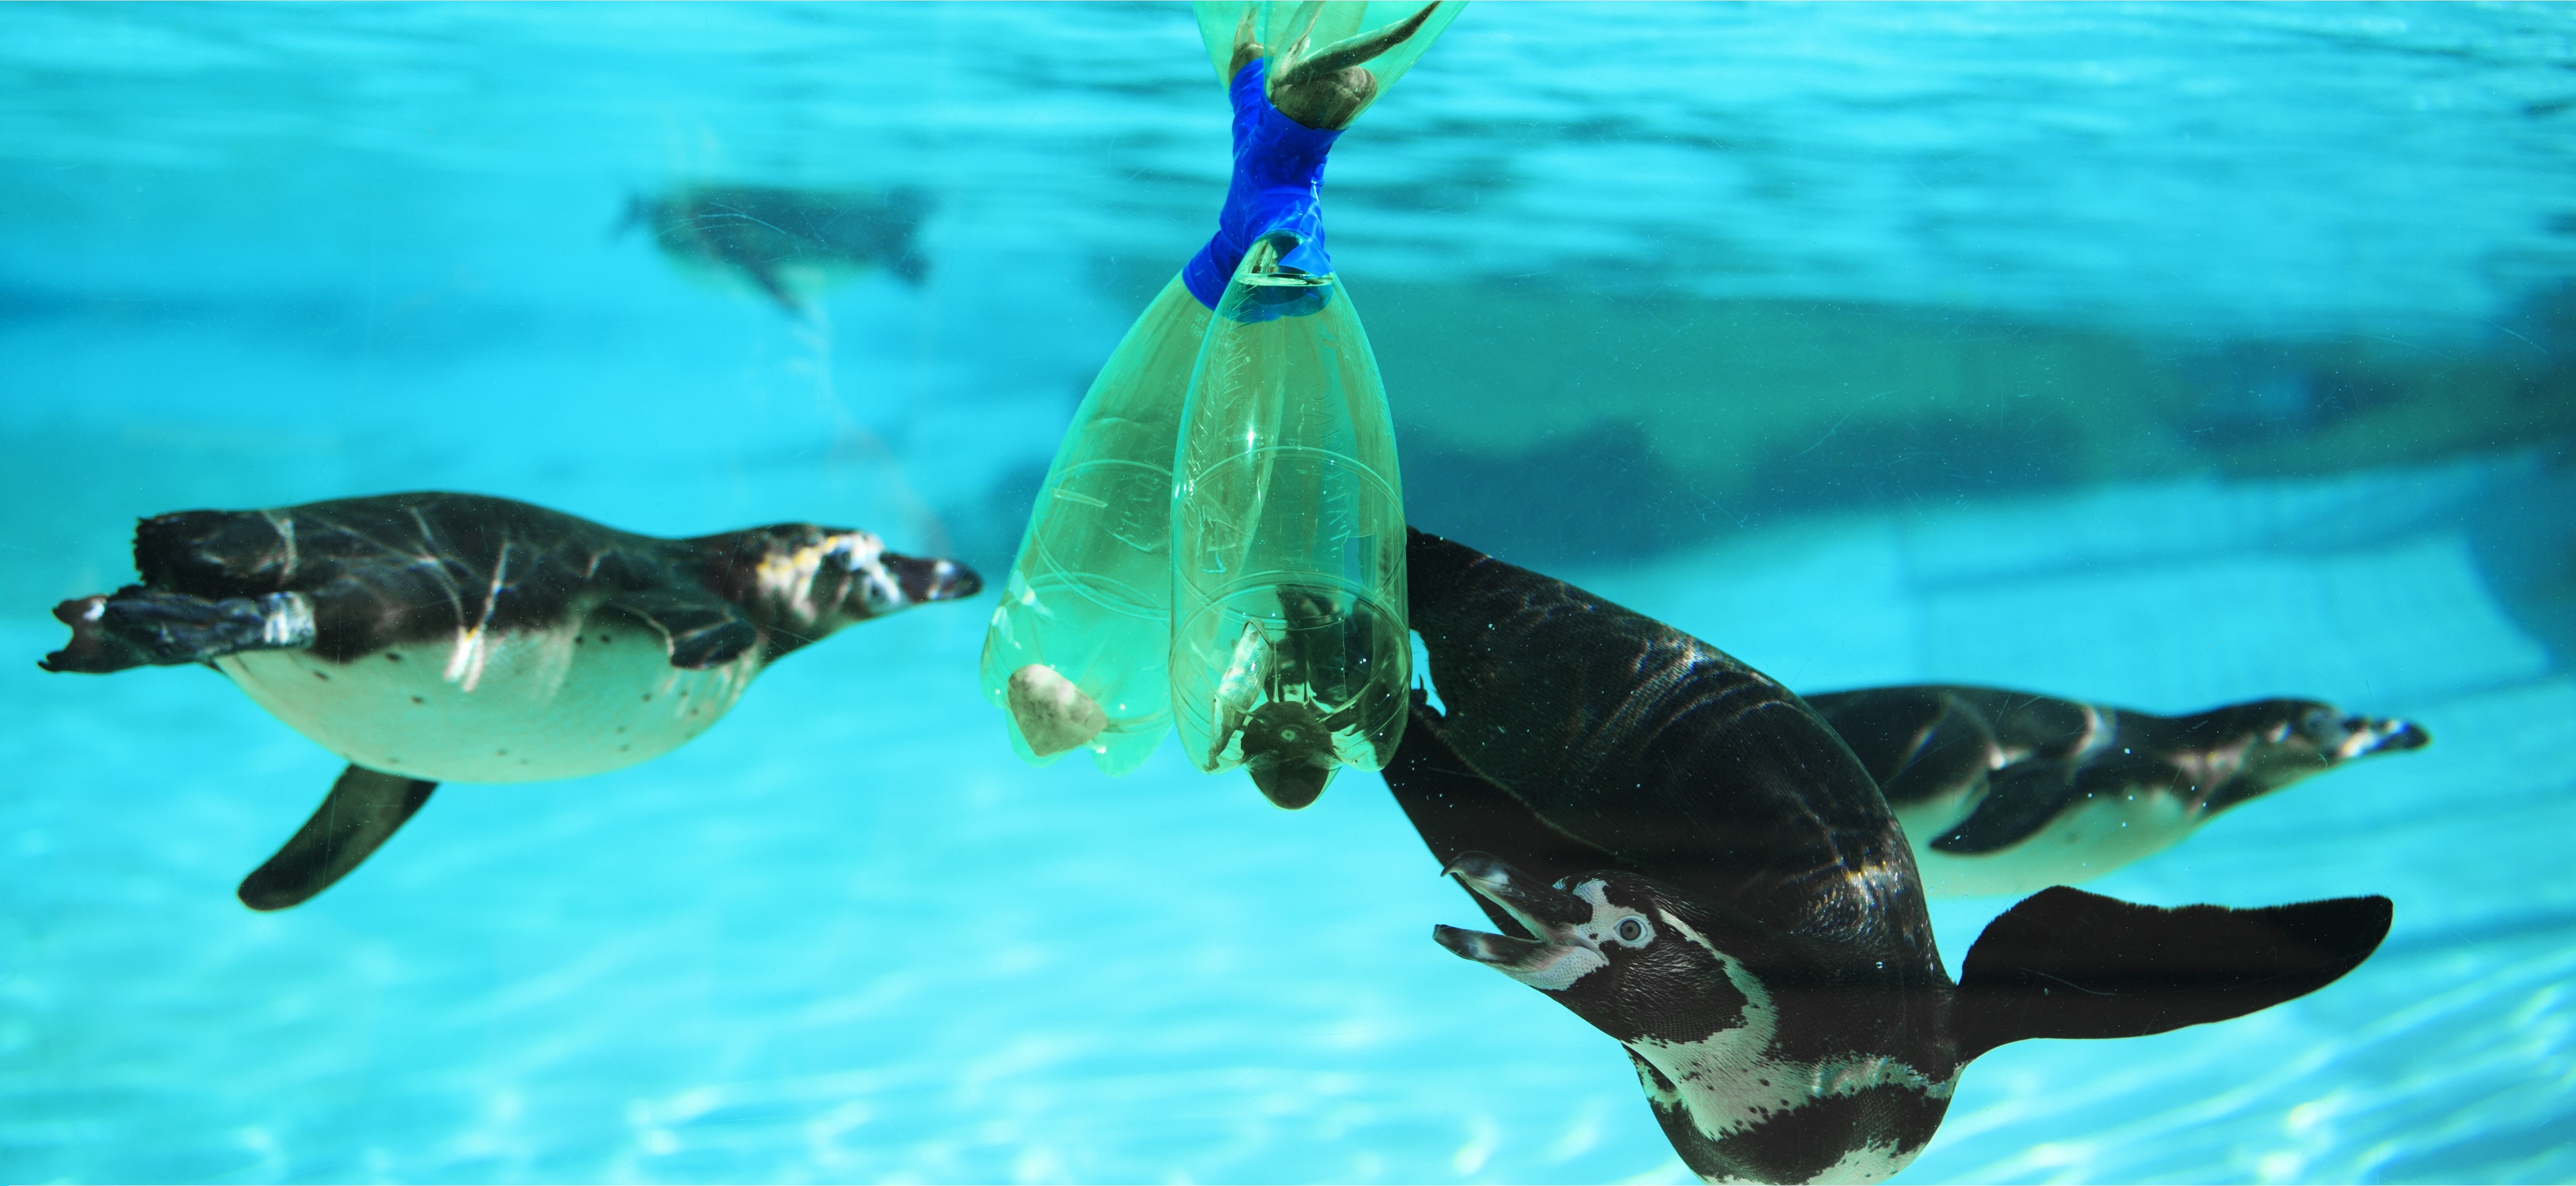 ZSL LONDON ZOO DITCHES SINGLE-USE PLASTIC WATER BOTTLES